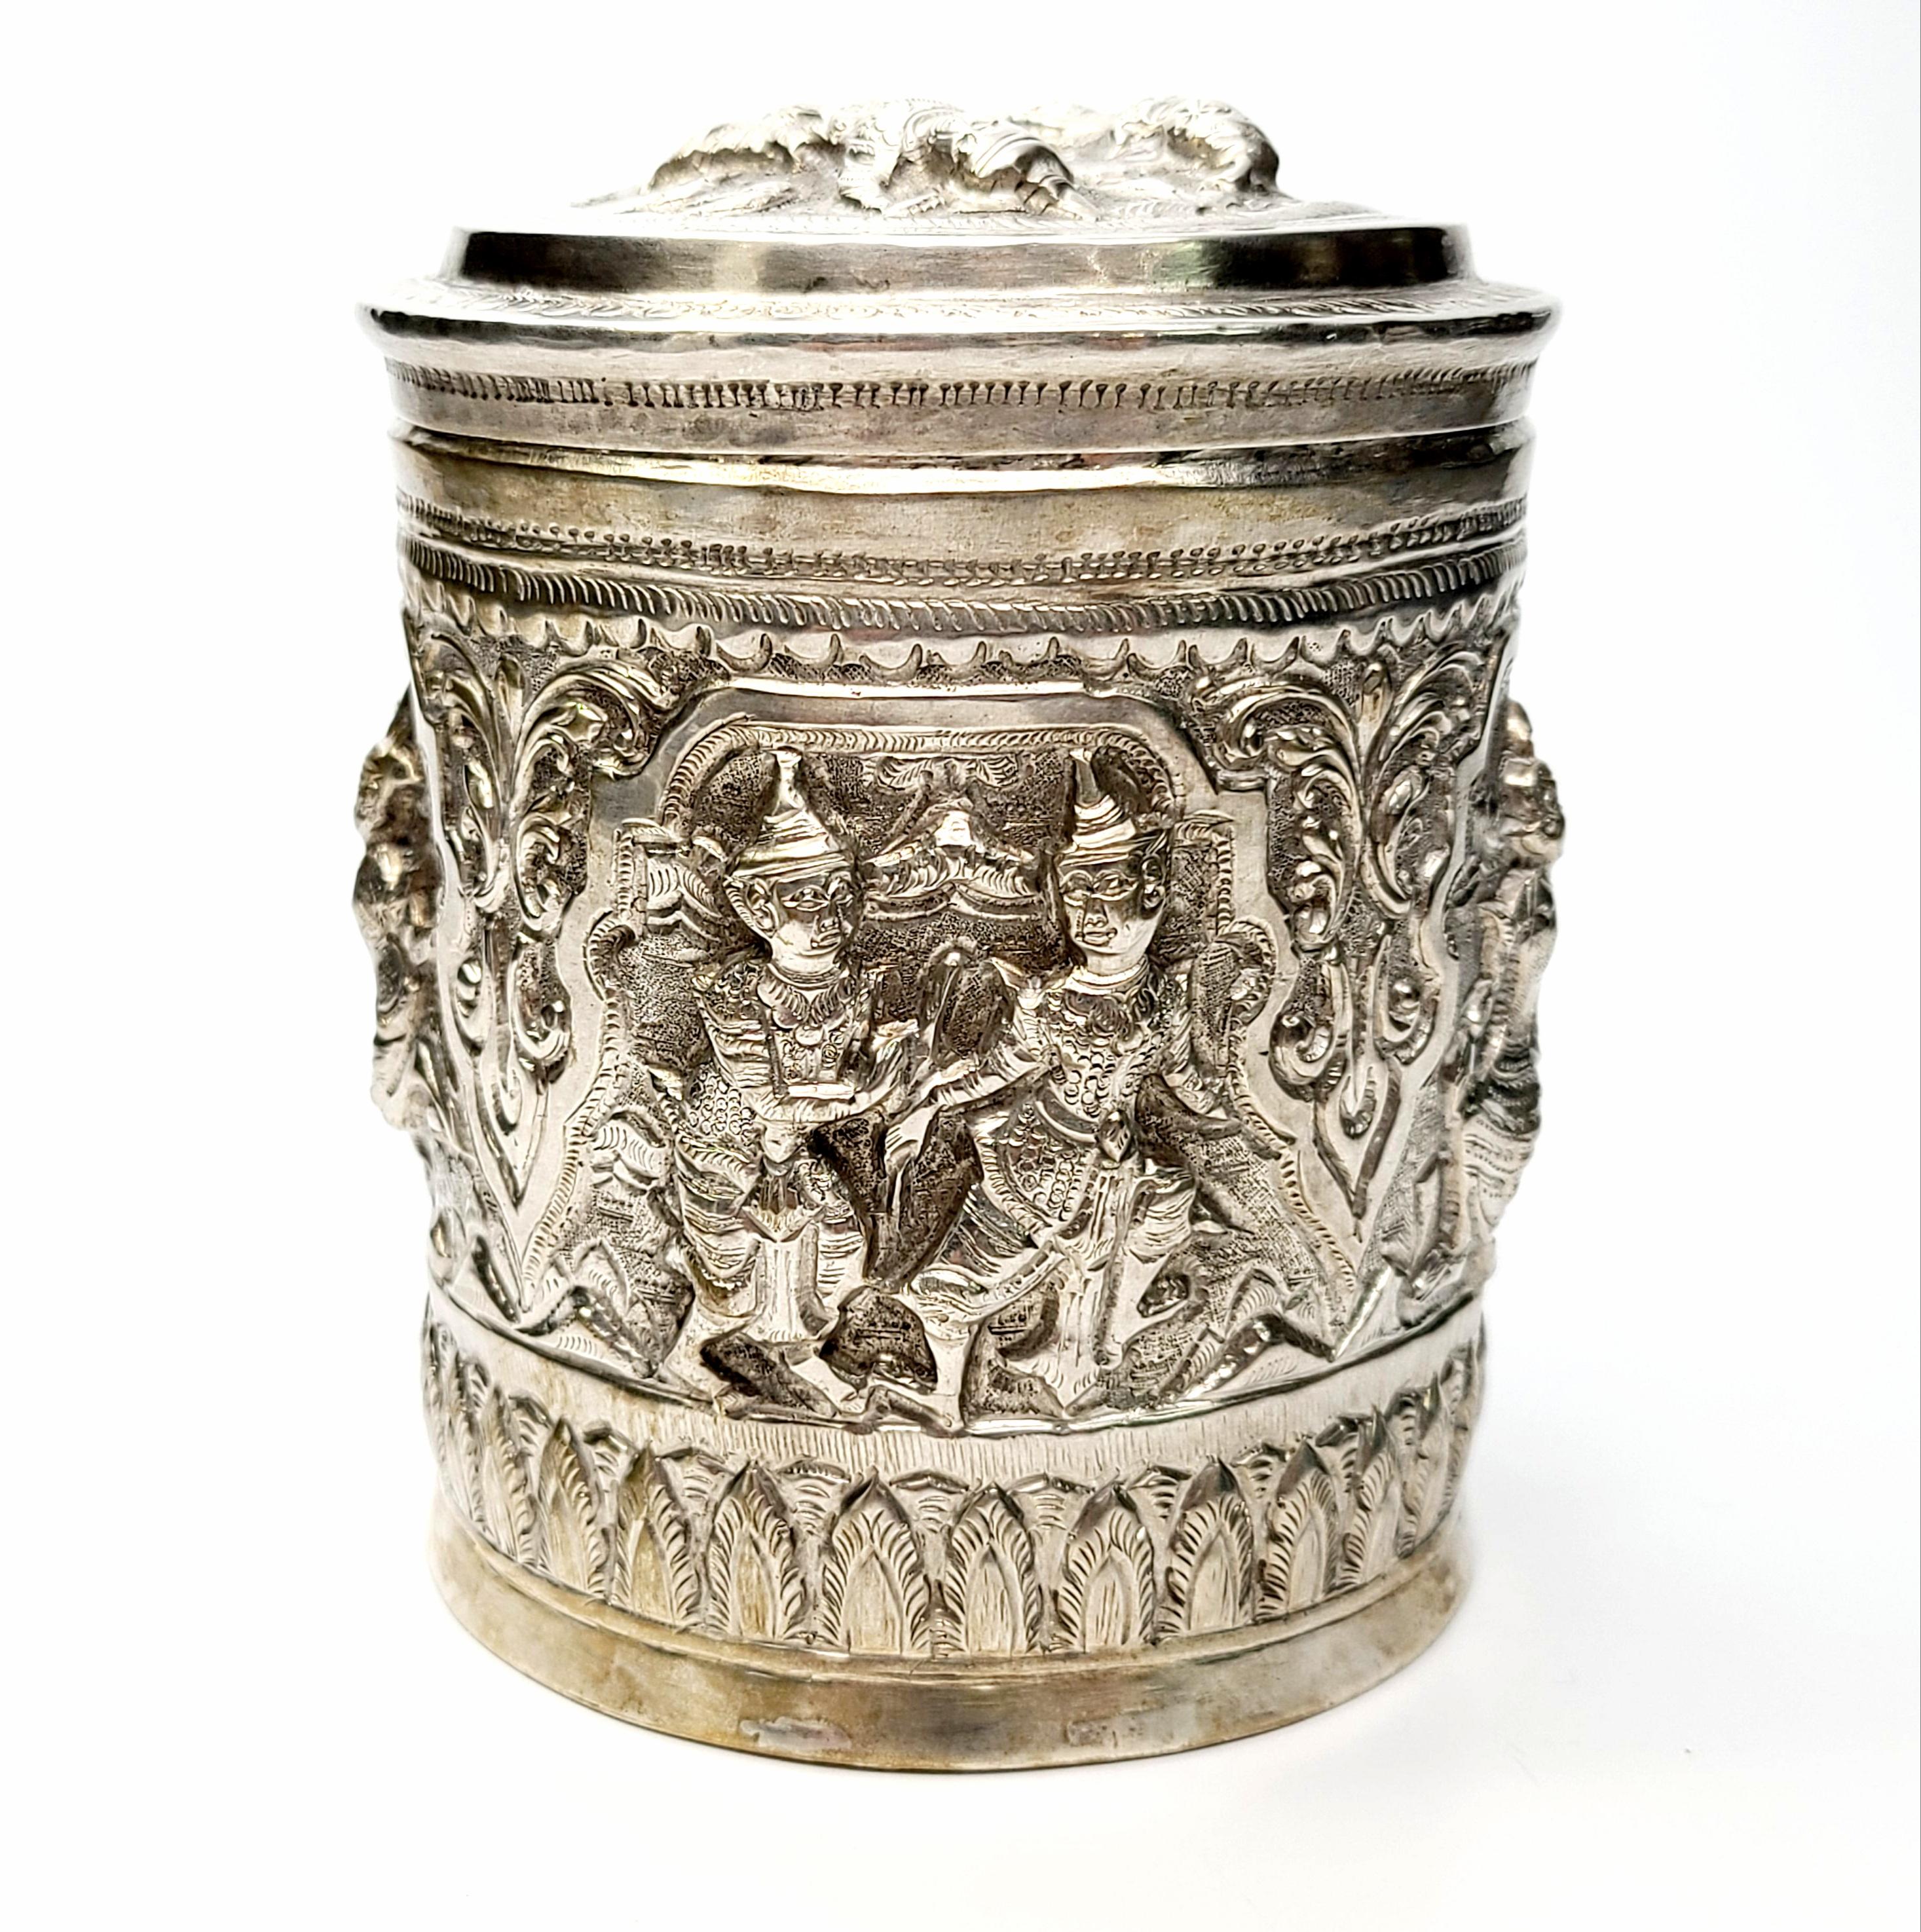 Antique 950 silver Burmese betel box canister.

Highly ornate repousse canister, likely used for betel nuts. 

Measures: 4